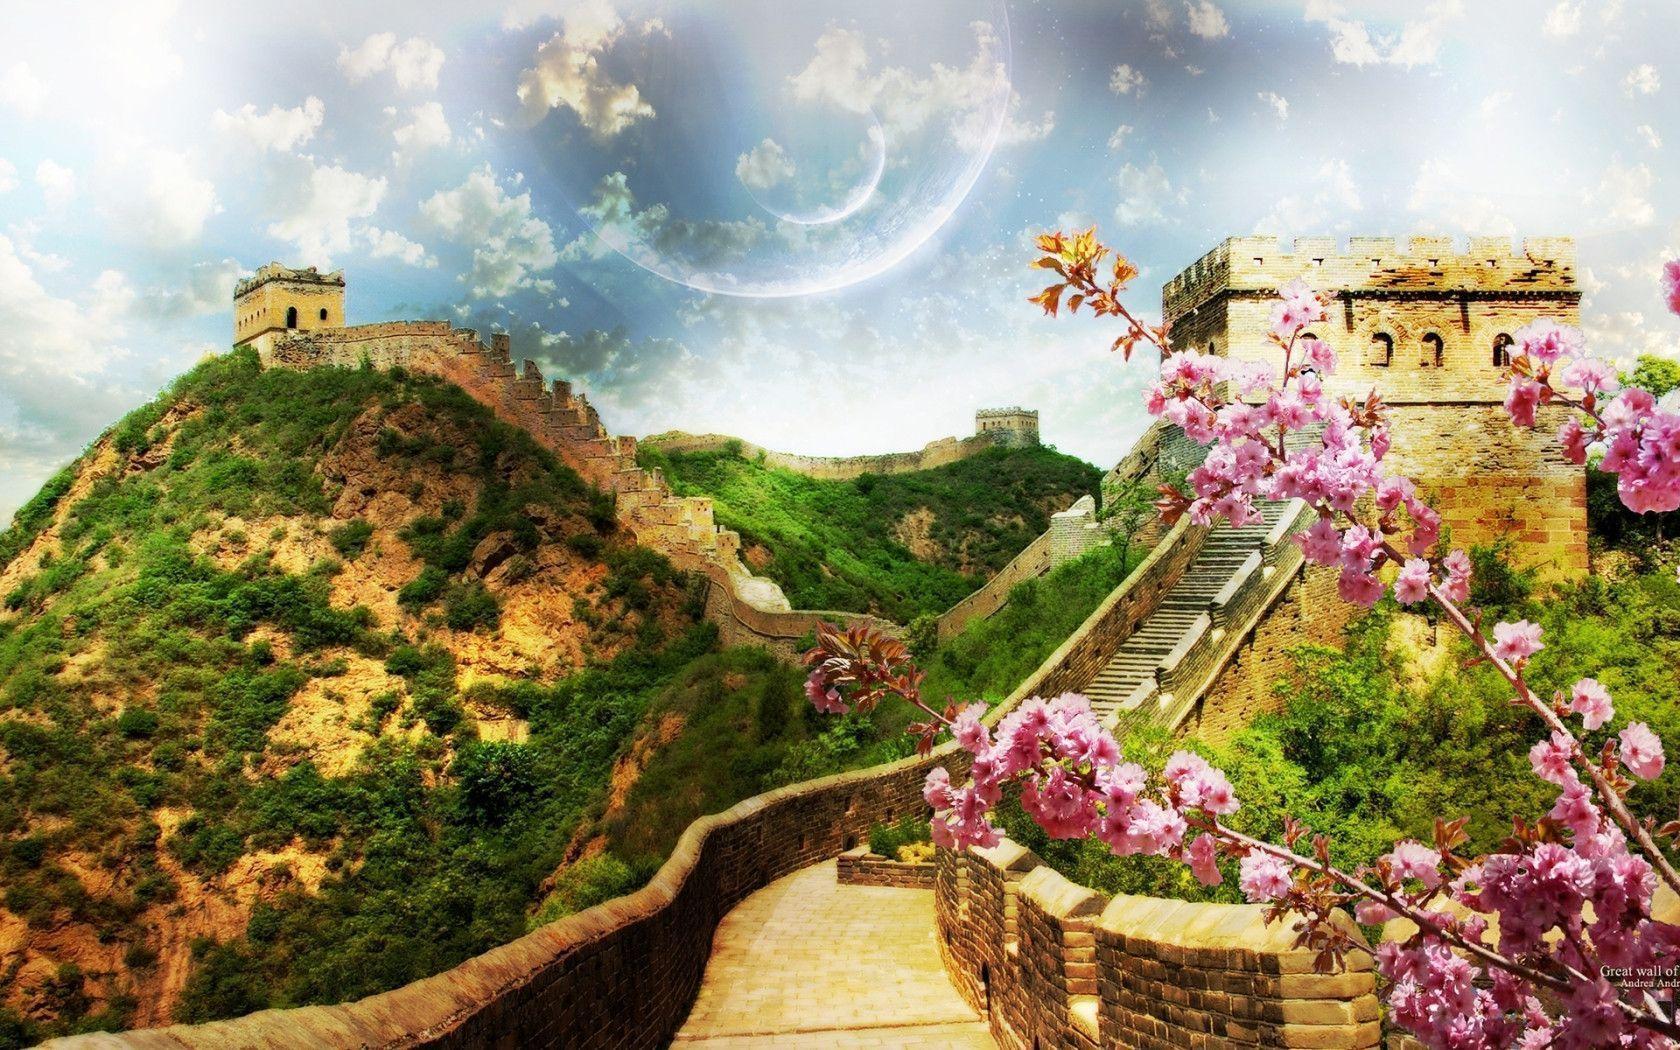 Creative Great Wall of China in Spring widescreen wallpaper. Wide